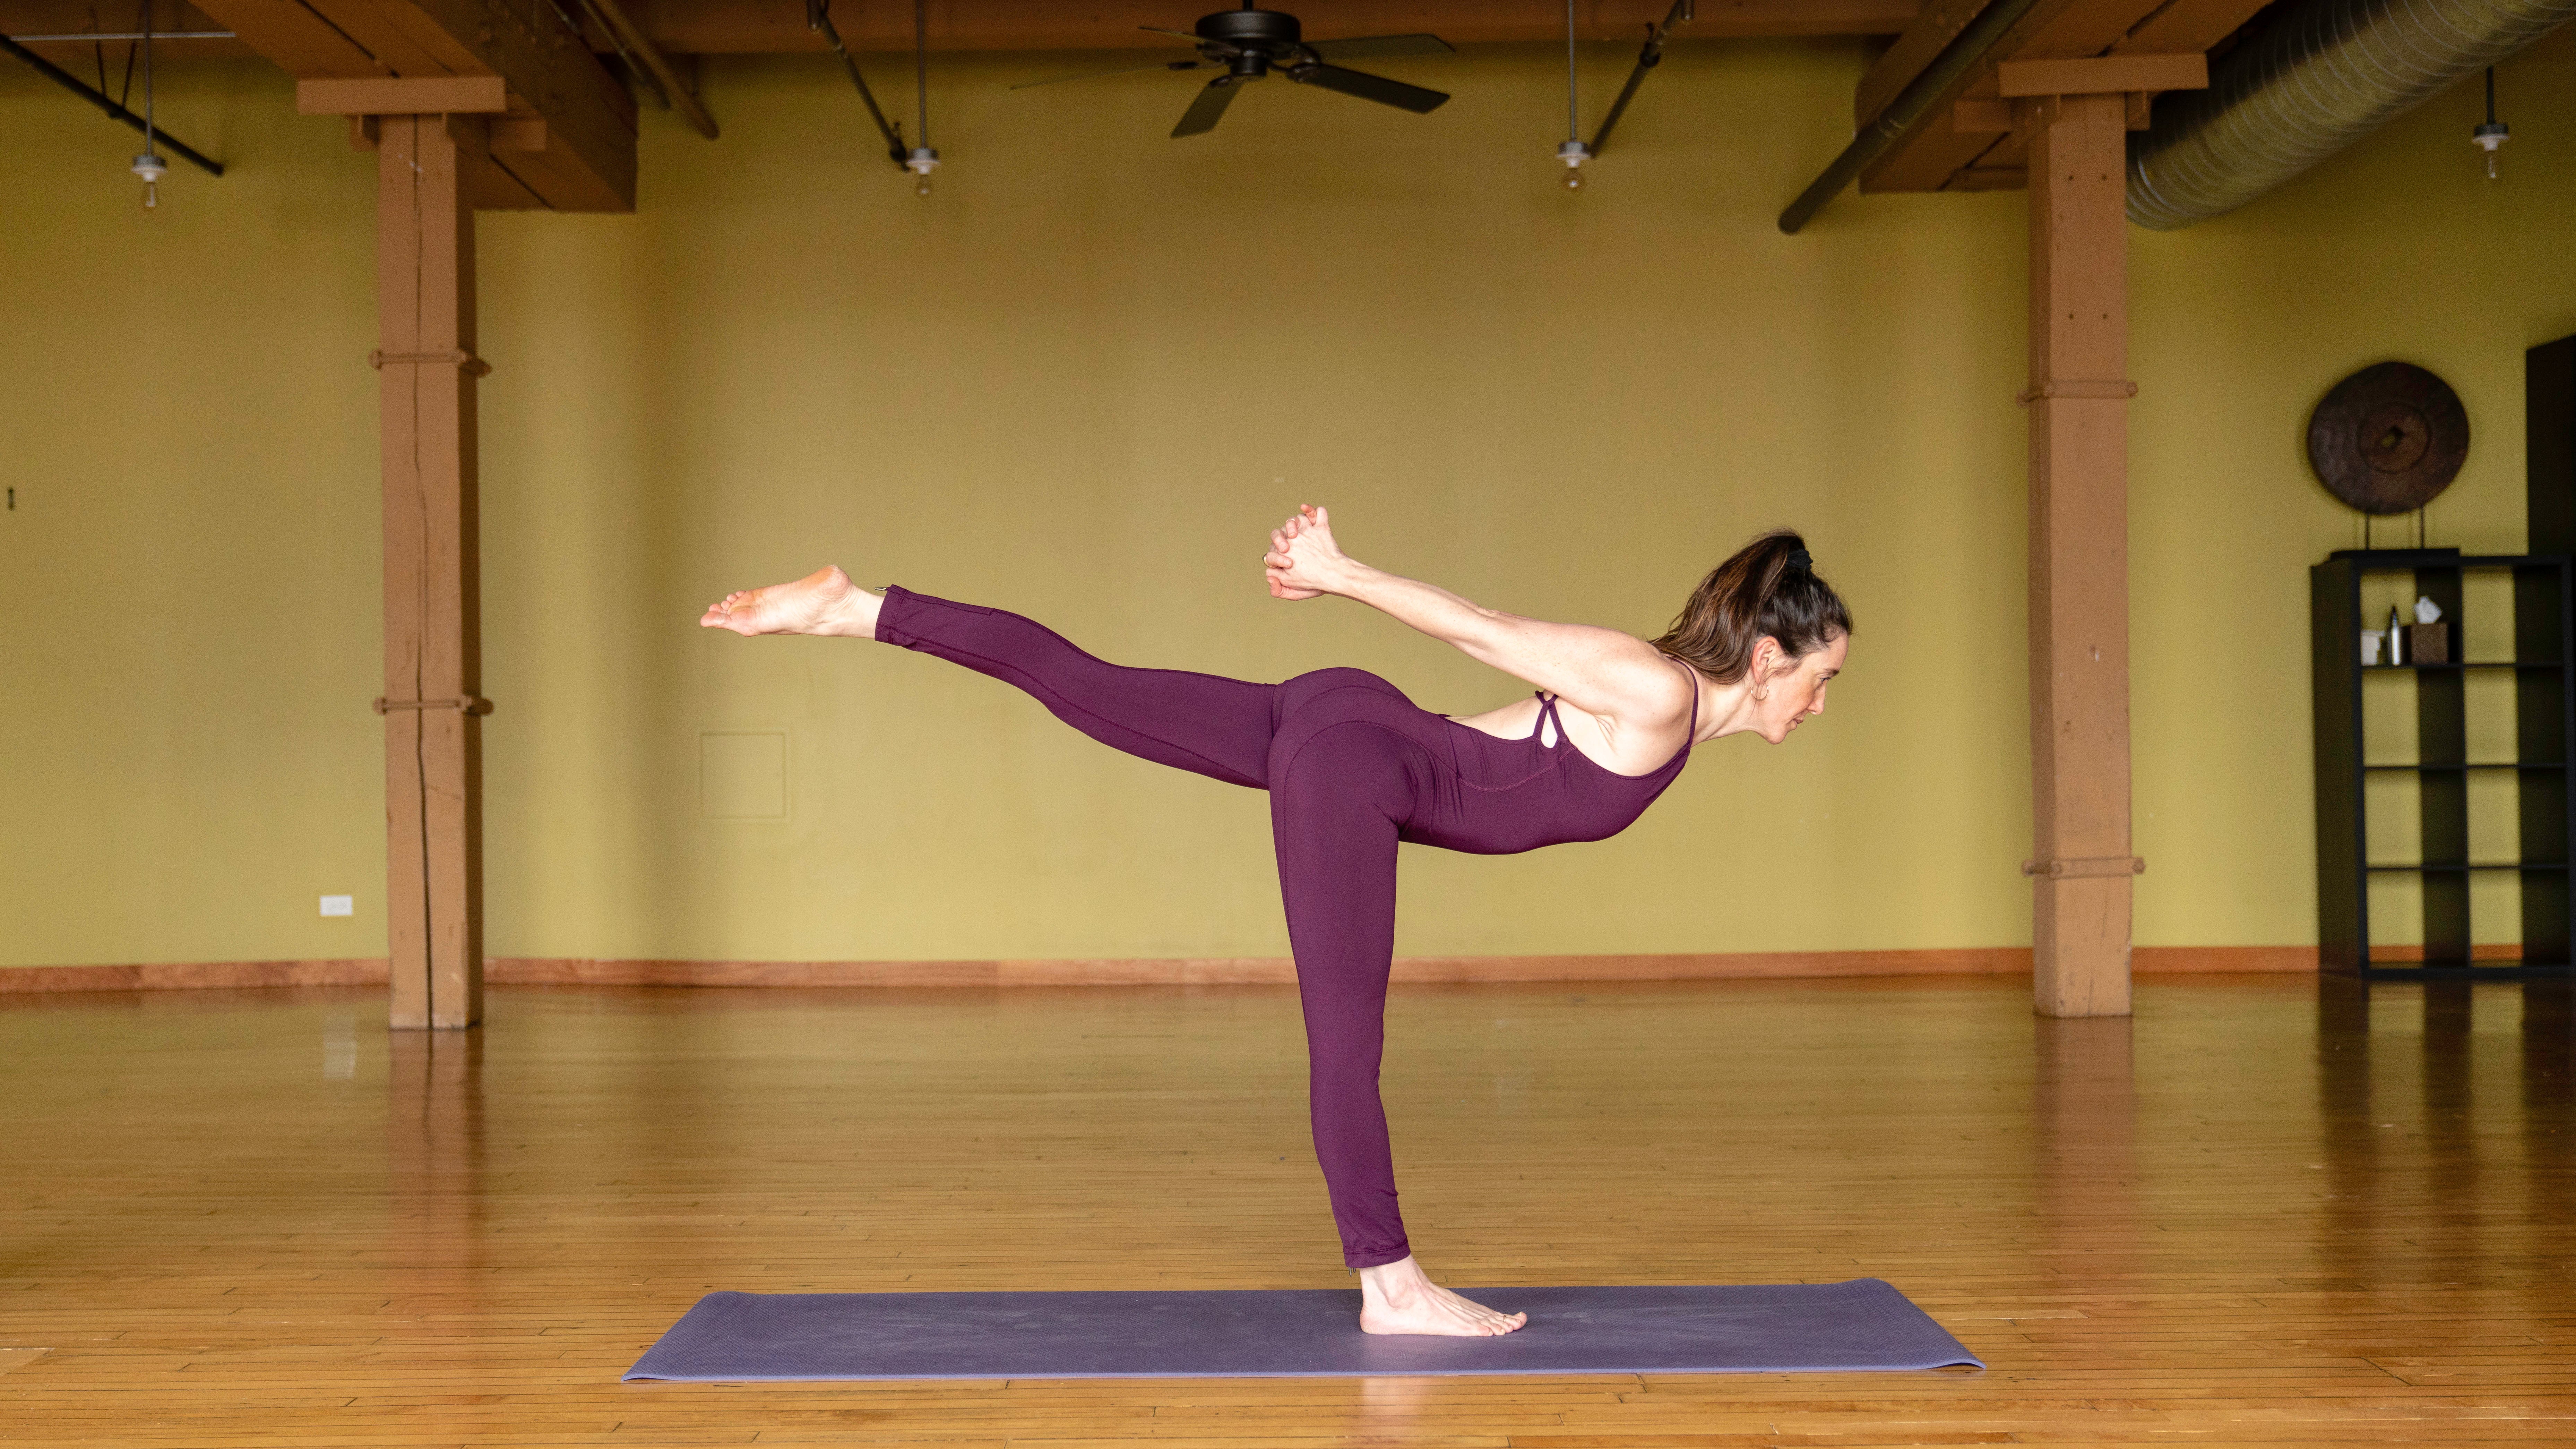 Move And Groove In The Heat: A Hot Yoga Workout by Mend - Issuu